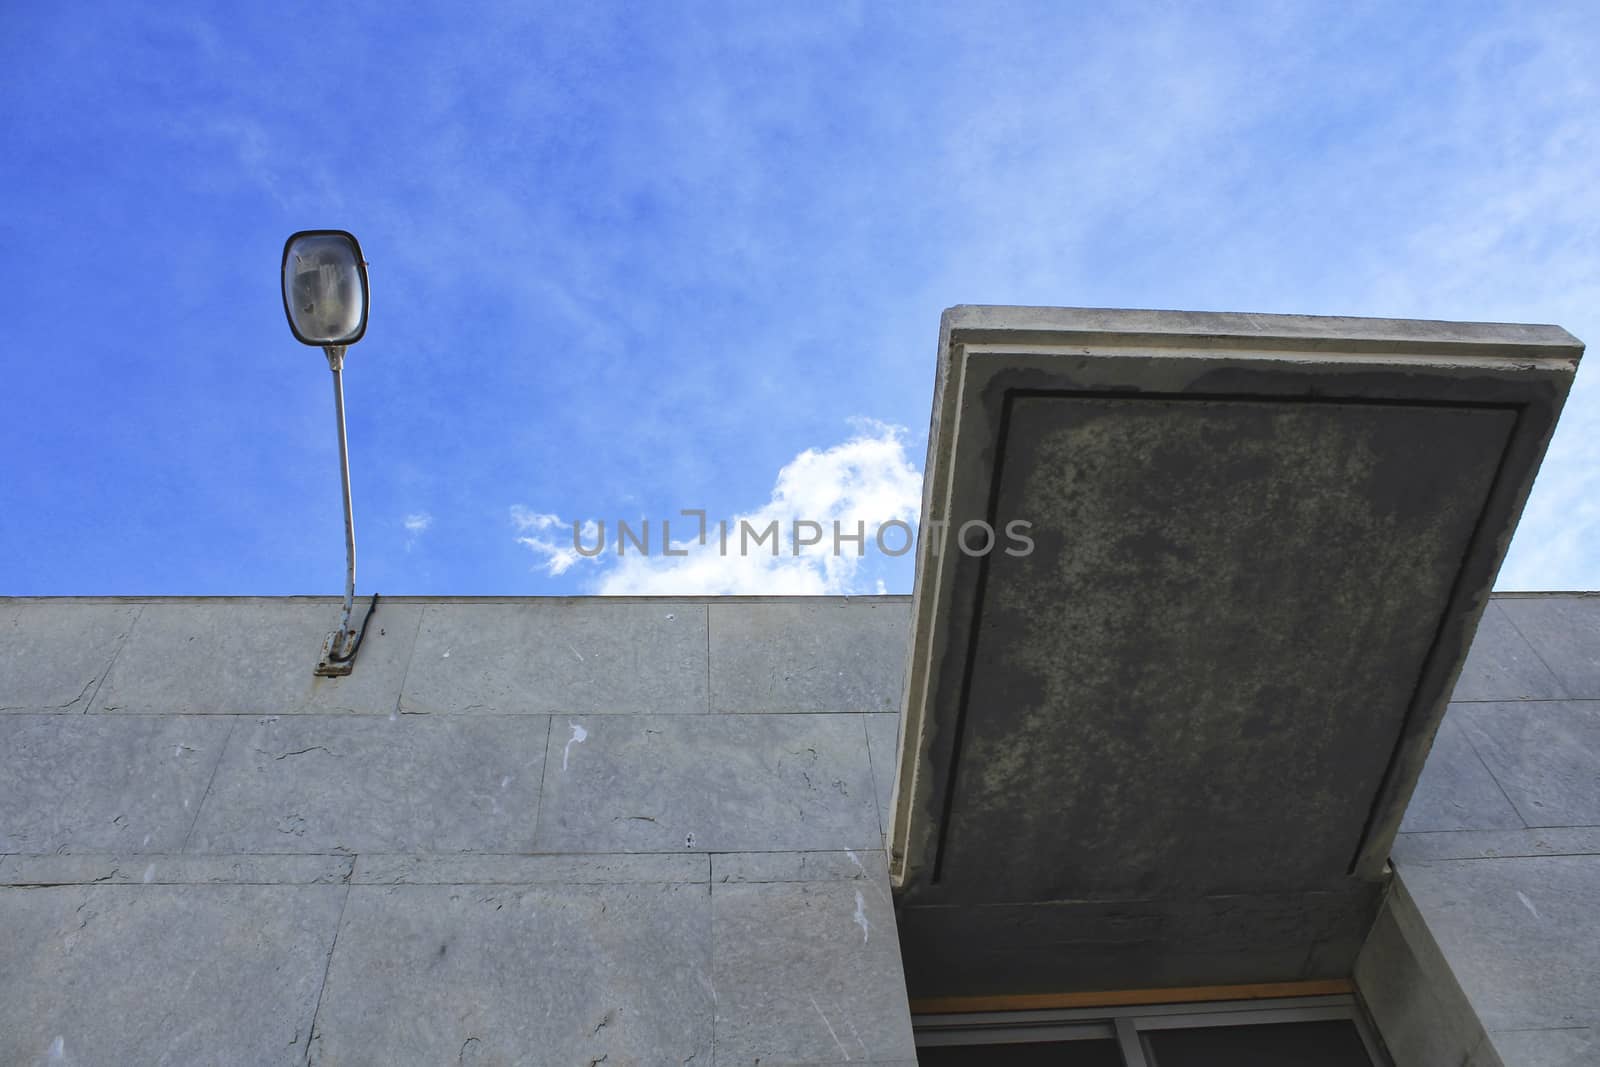 Concrete facade and lamppost by soniabonet